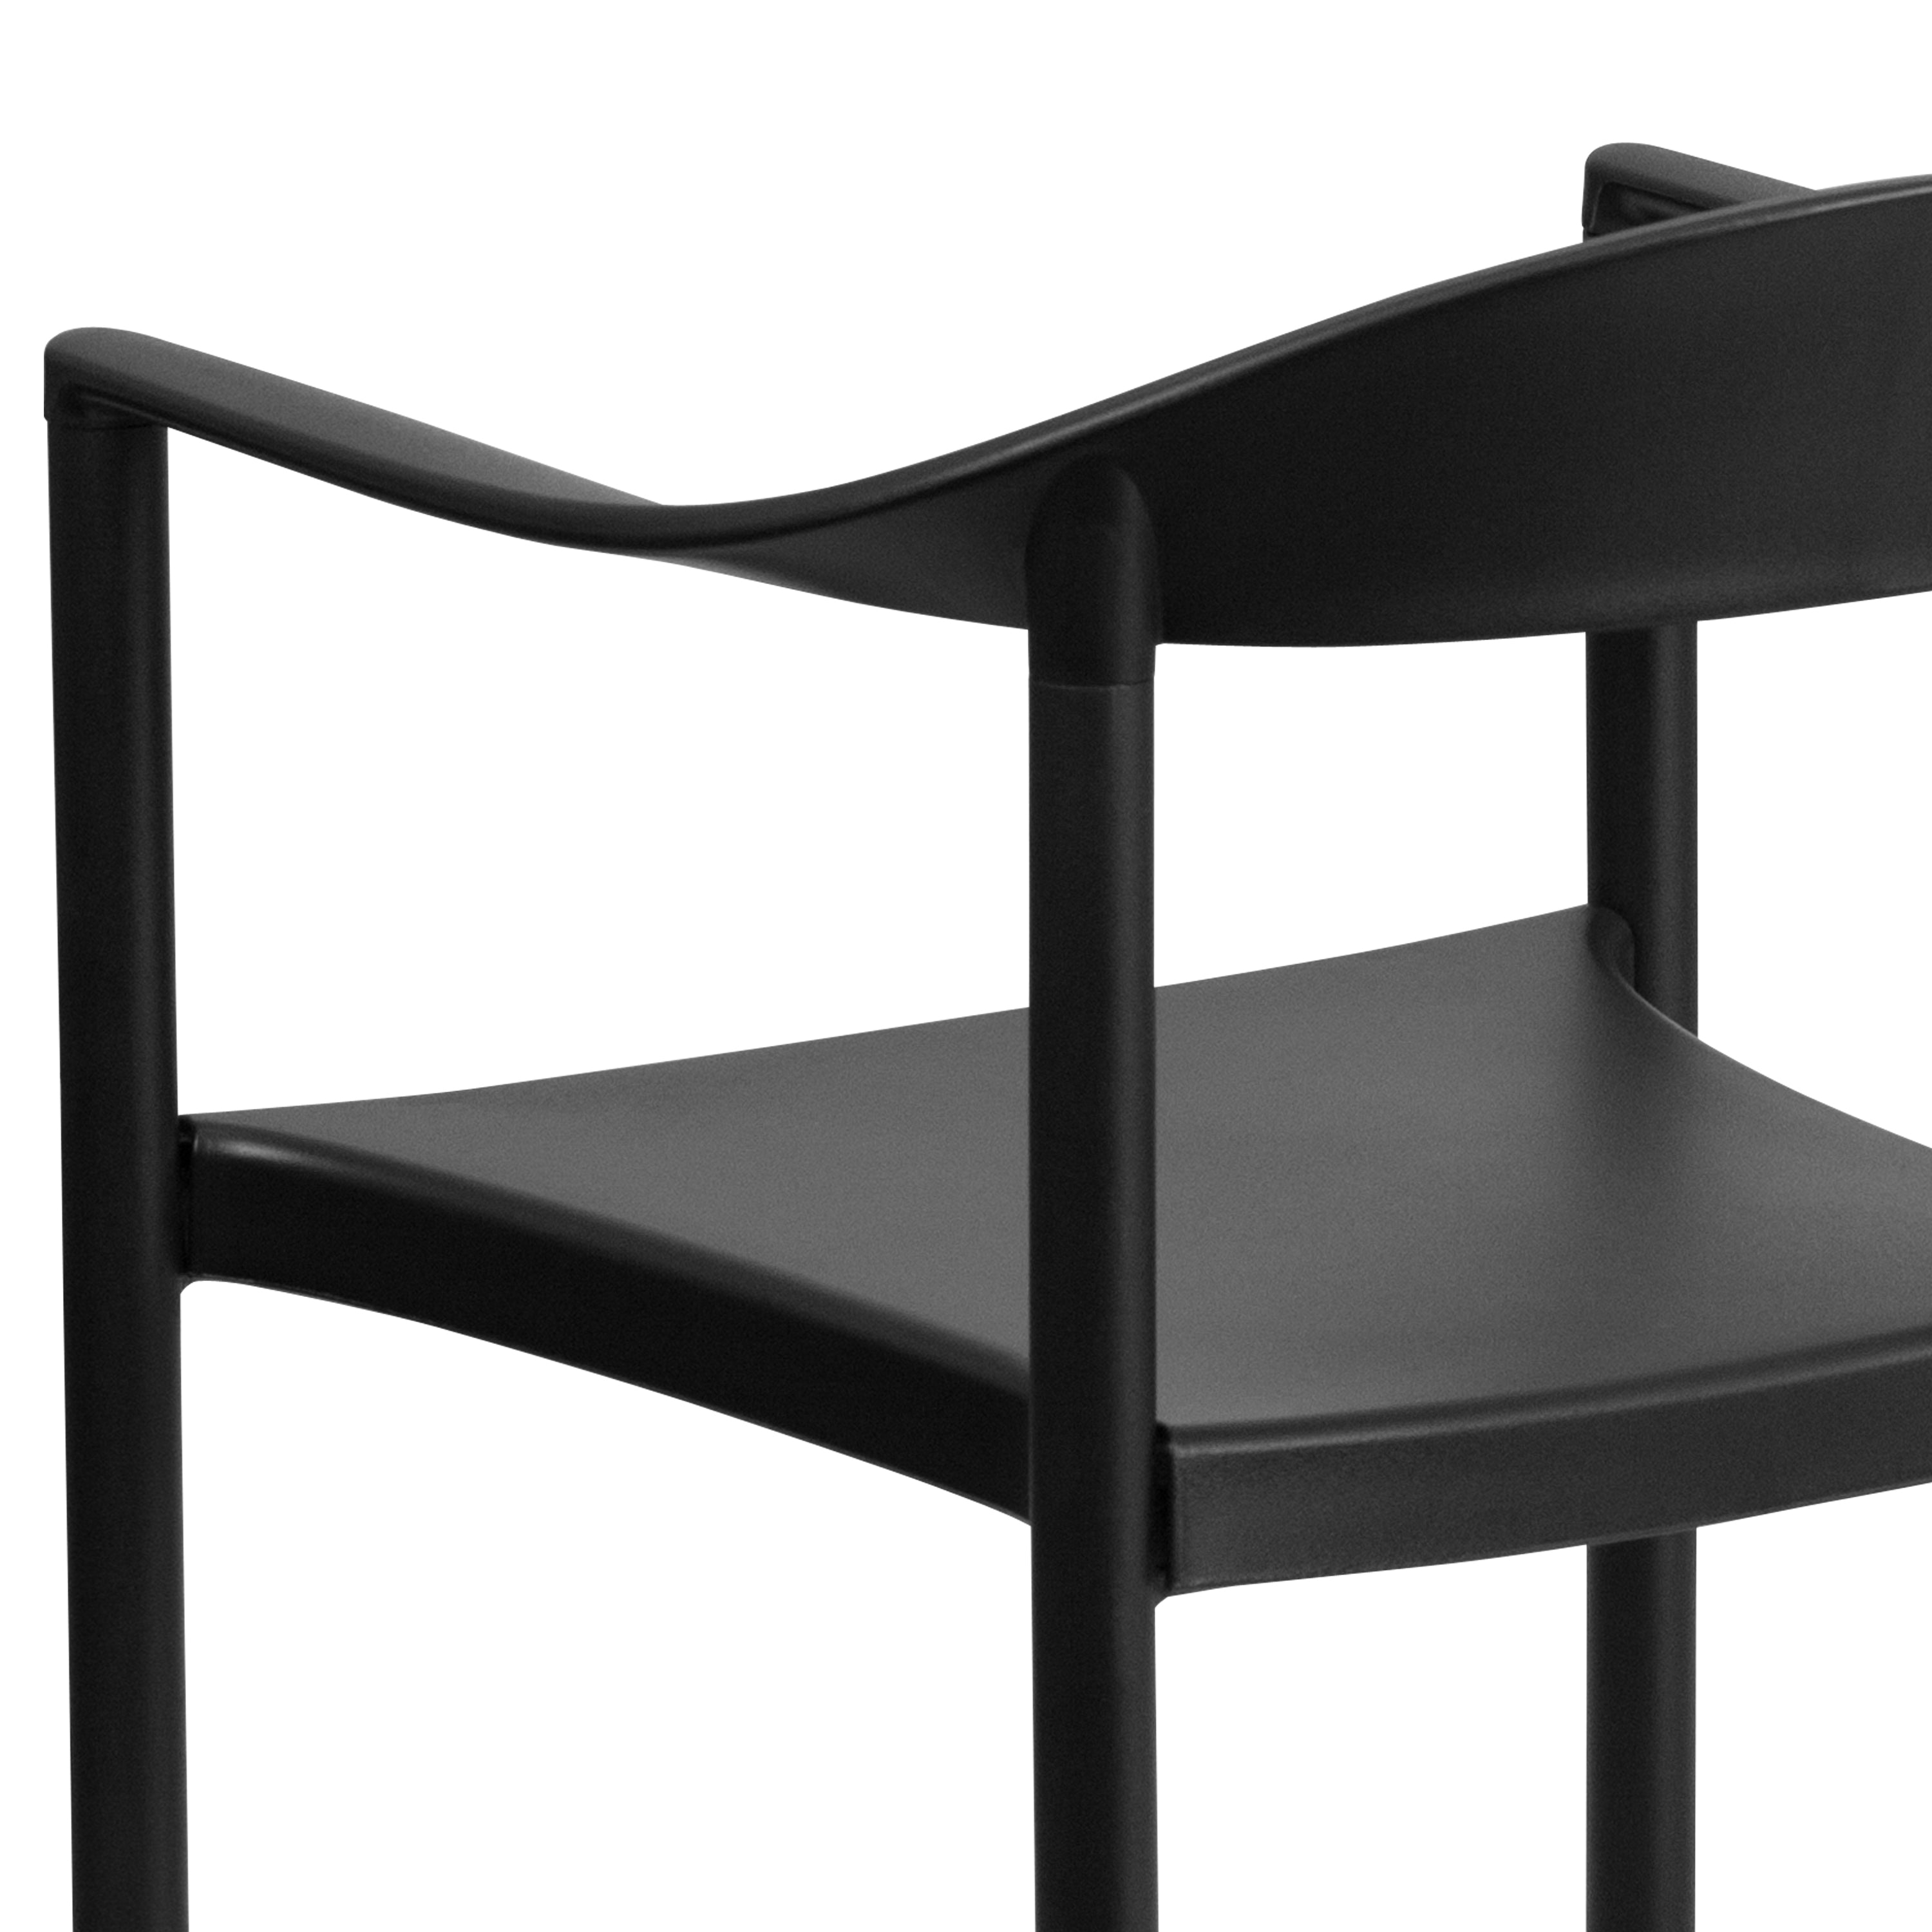 HERCULES Series 1000 lb. Capacity Plastic Cafe Stack Chair-Plastic Stack Chair-Flash Furniture-Wall2Wall Furnishings